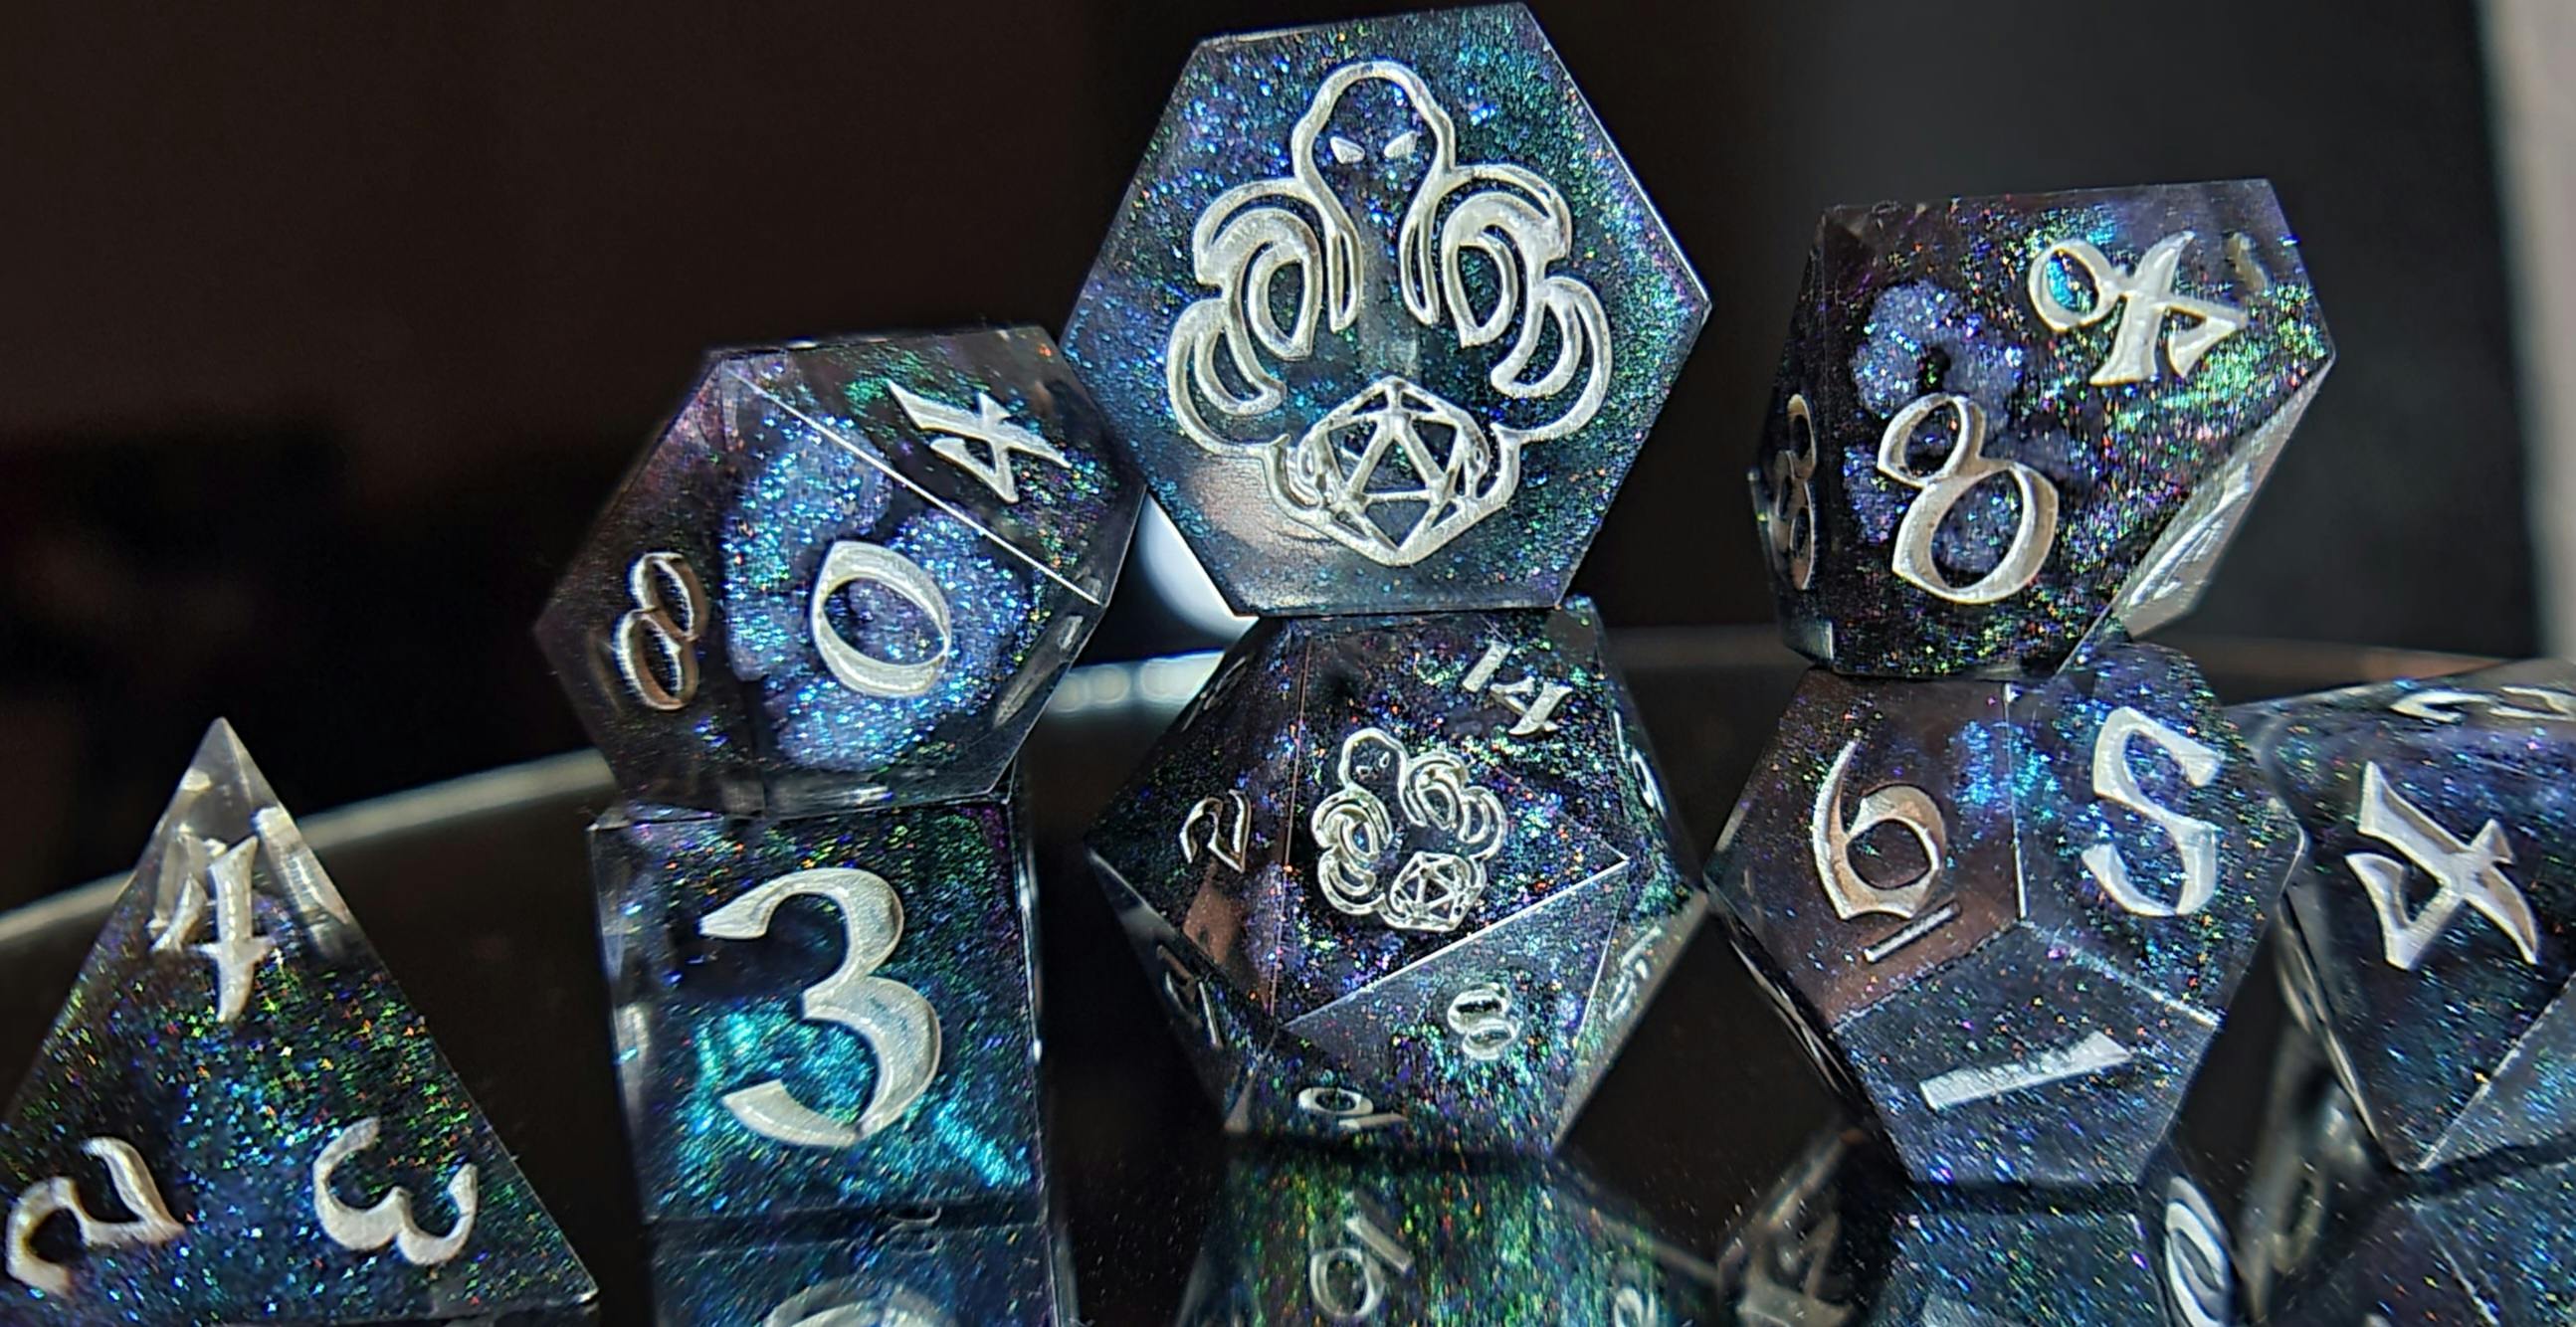 DnD Dice Set. "Drow Queen's Kiss". Polyhedral Set